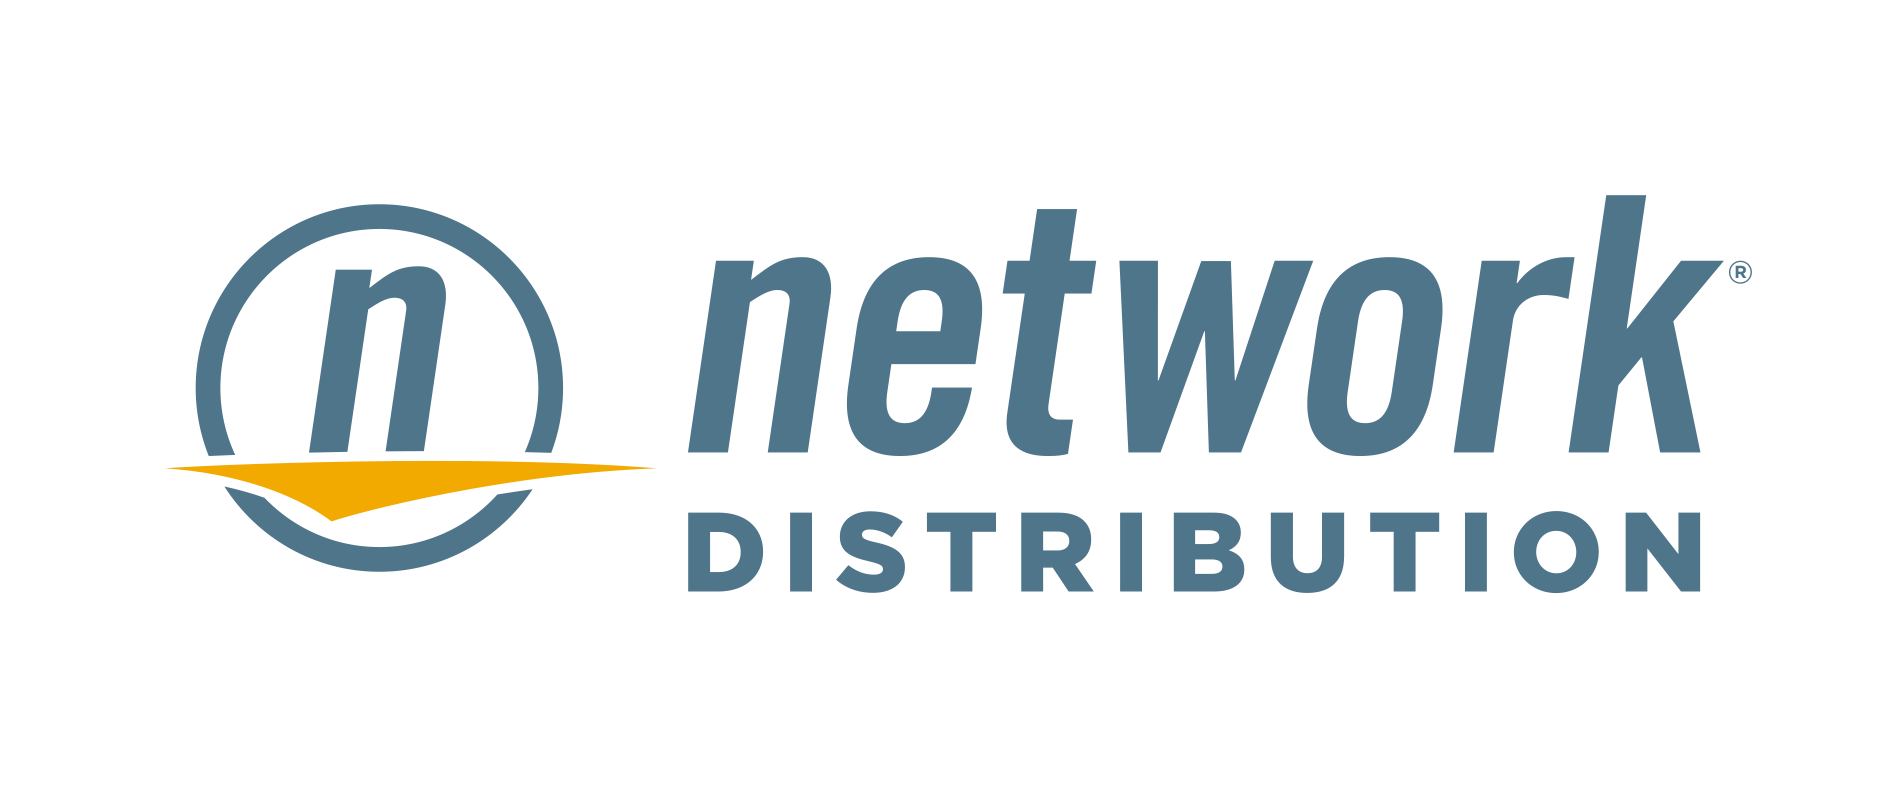 Network Services - logo image